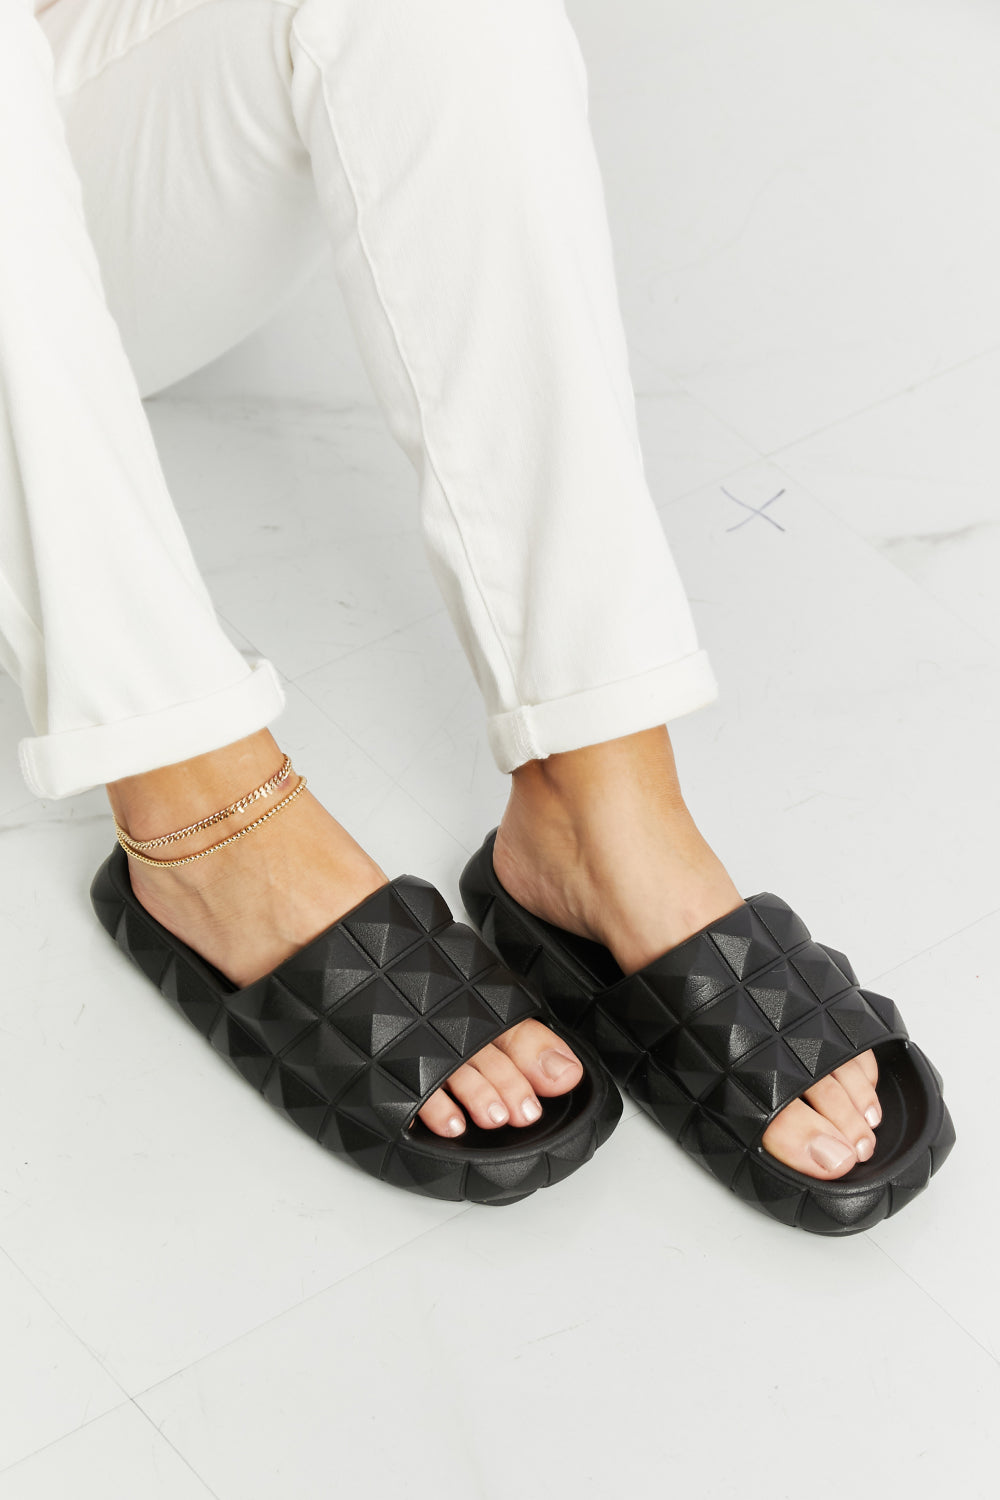 Tell Me About it Stud Sandals